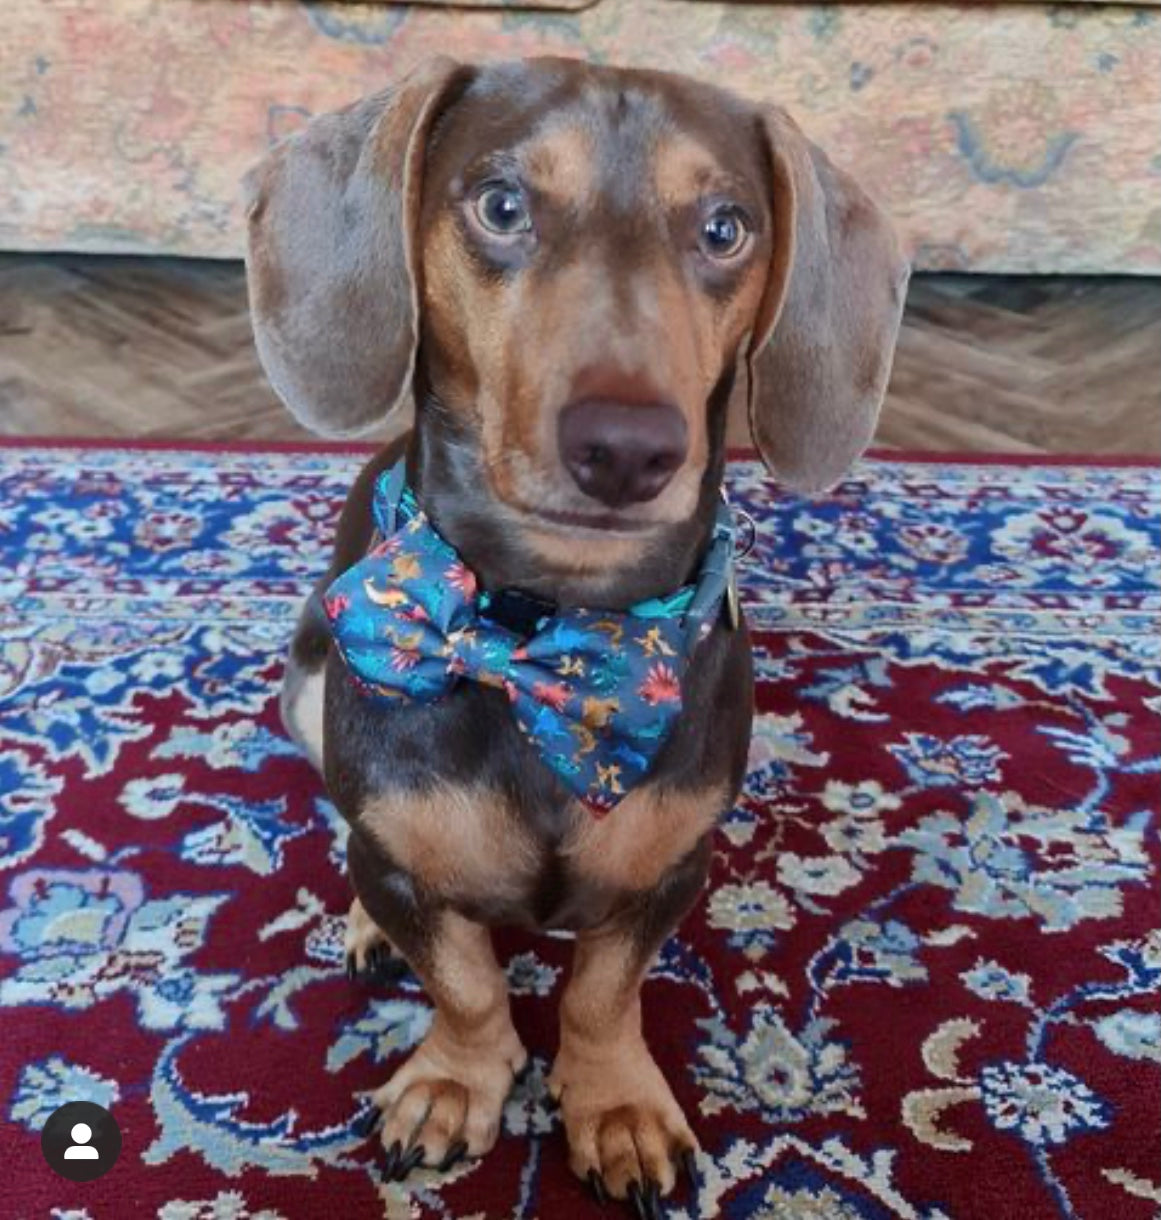 Dachshund in Rex dog collar and bow tie